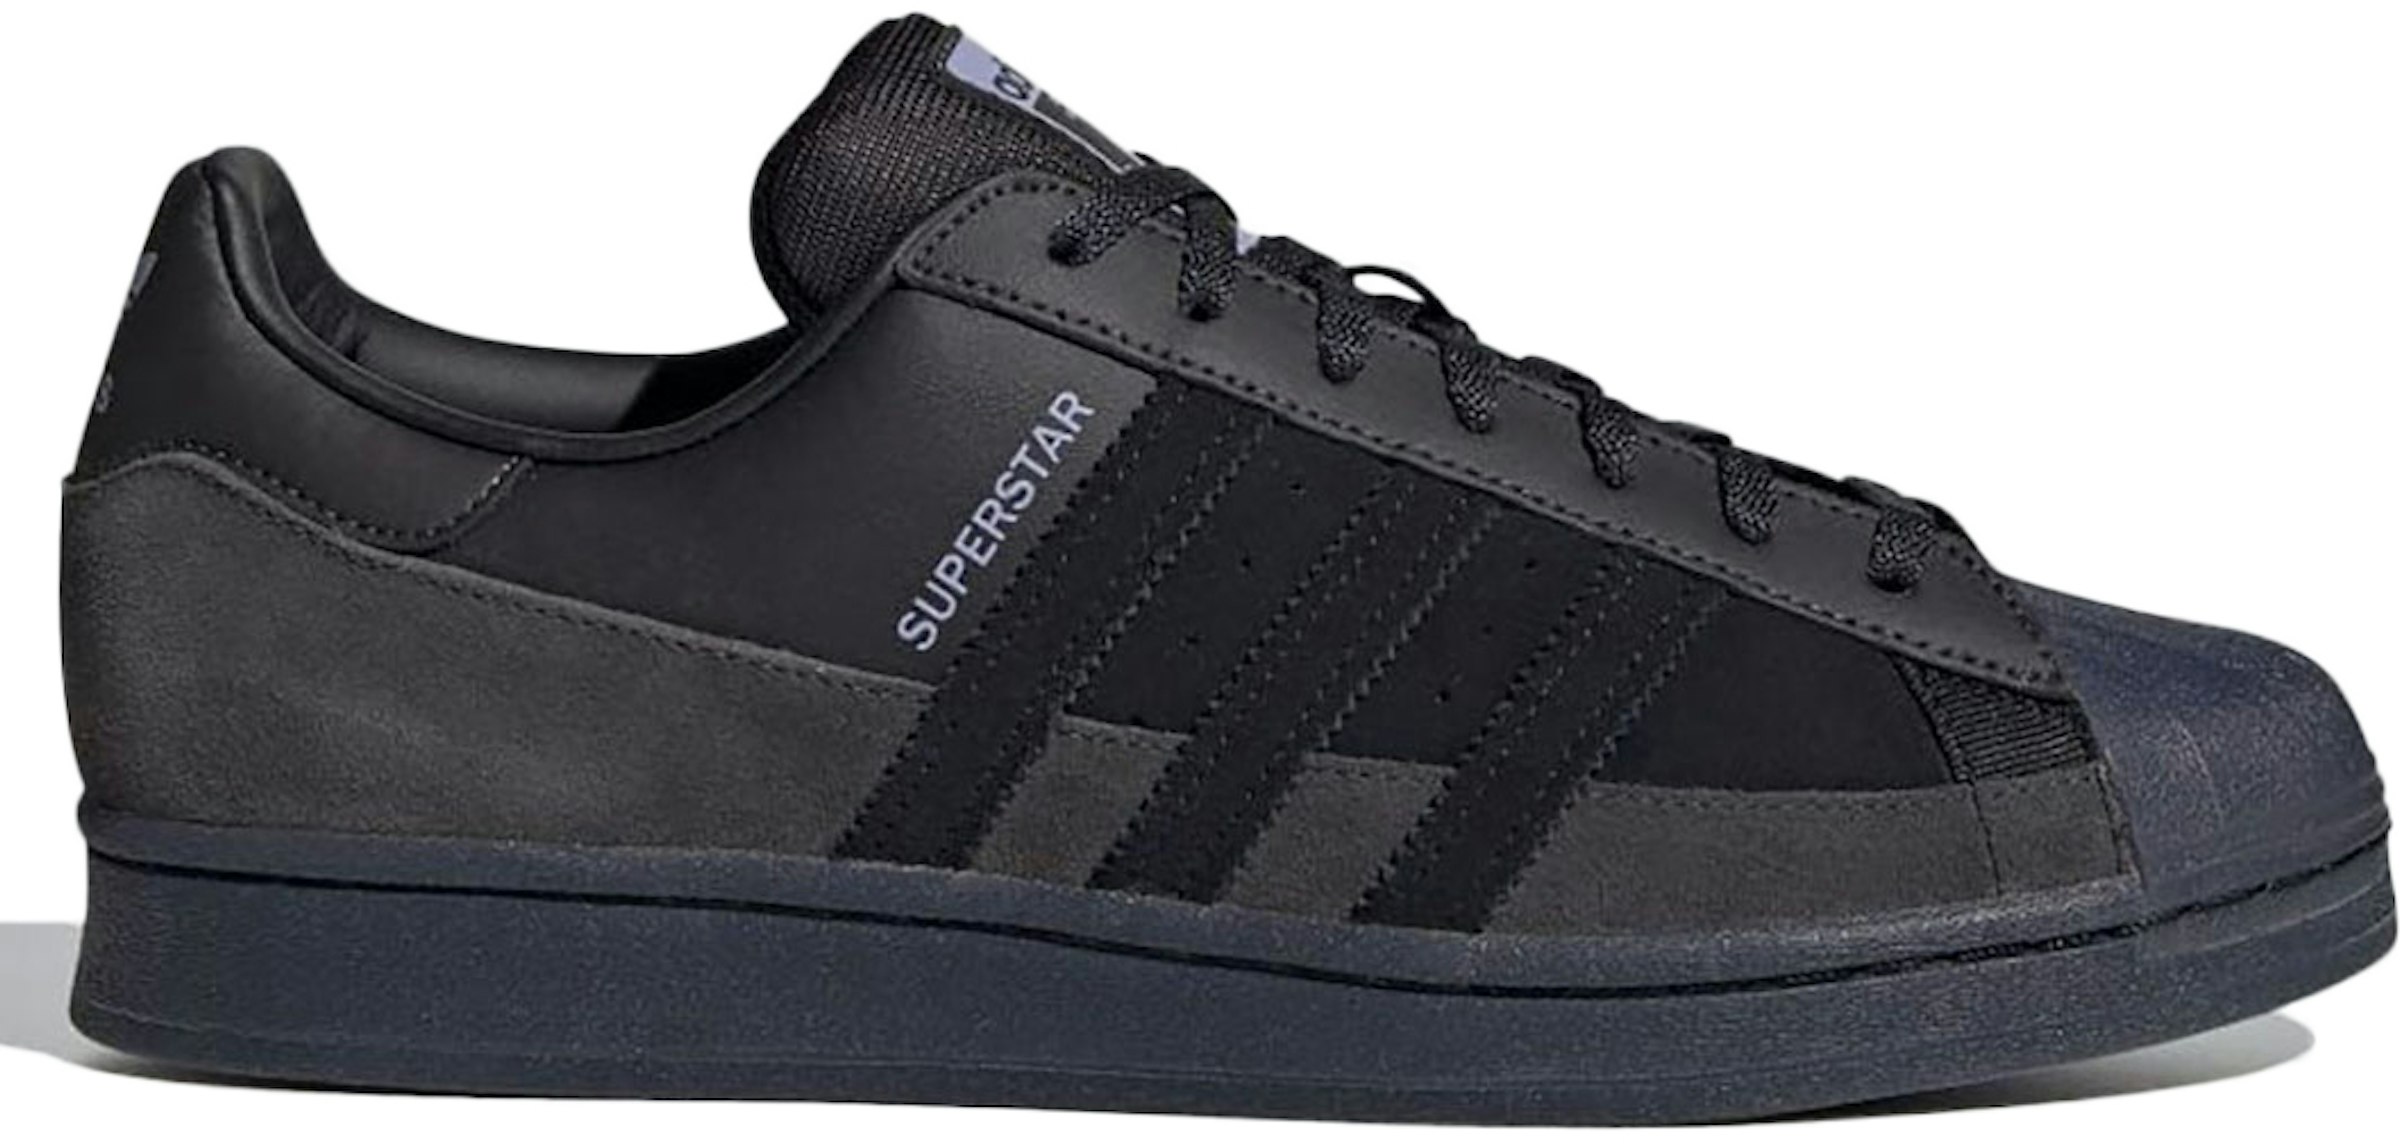 adidas Smooth Leather and Suede - FX5564 -